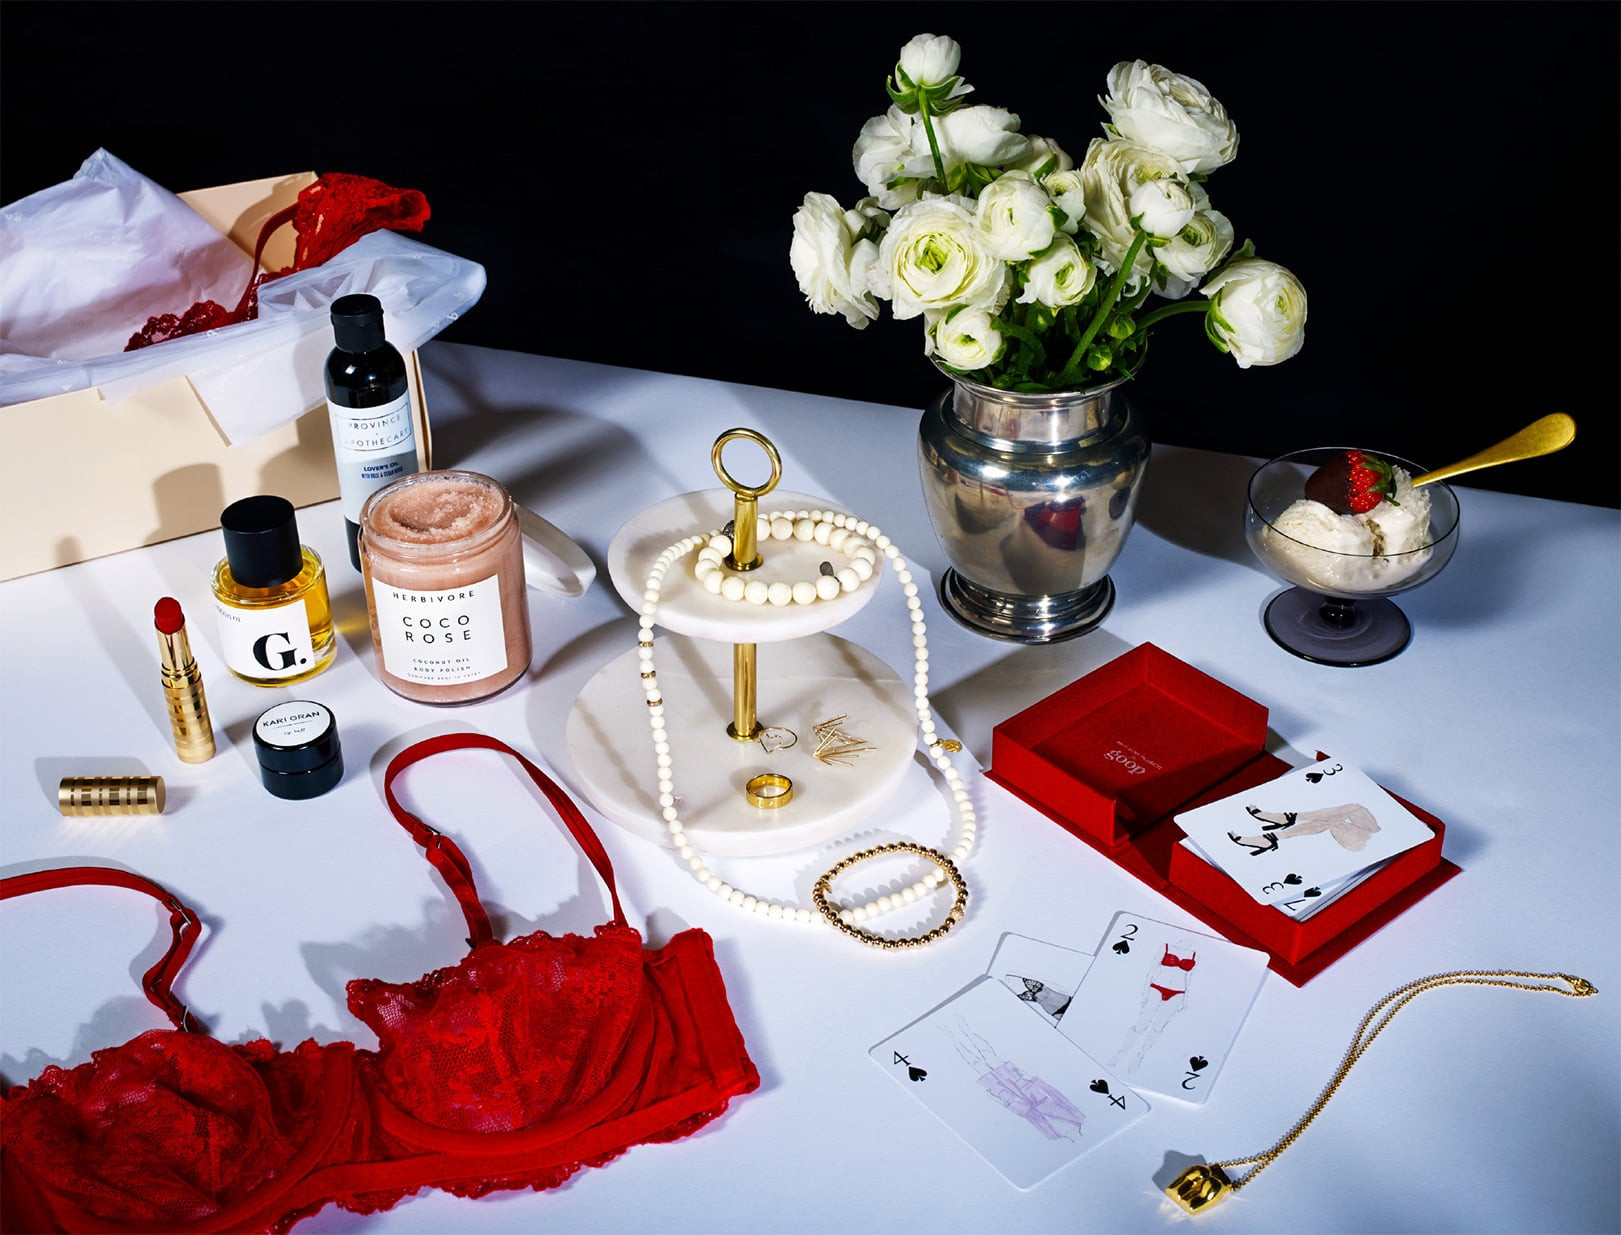 Valentines Day Gifts For Women
 The Women’s Valentine’s Day Gift Guide